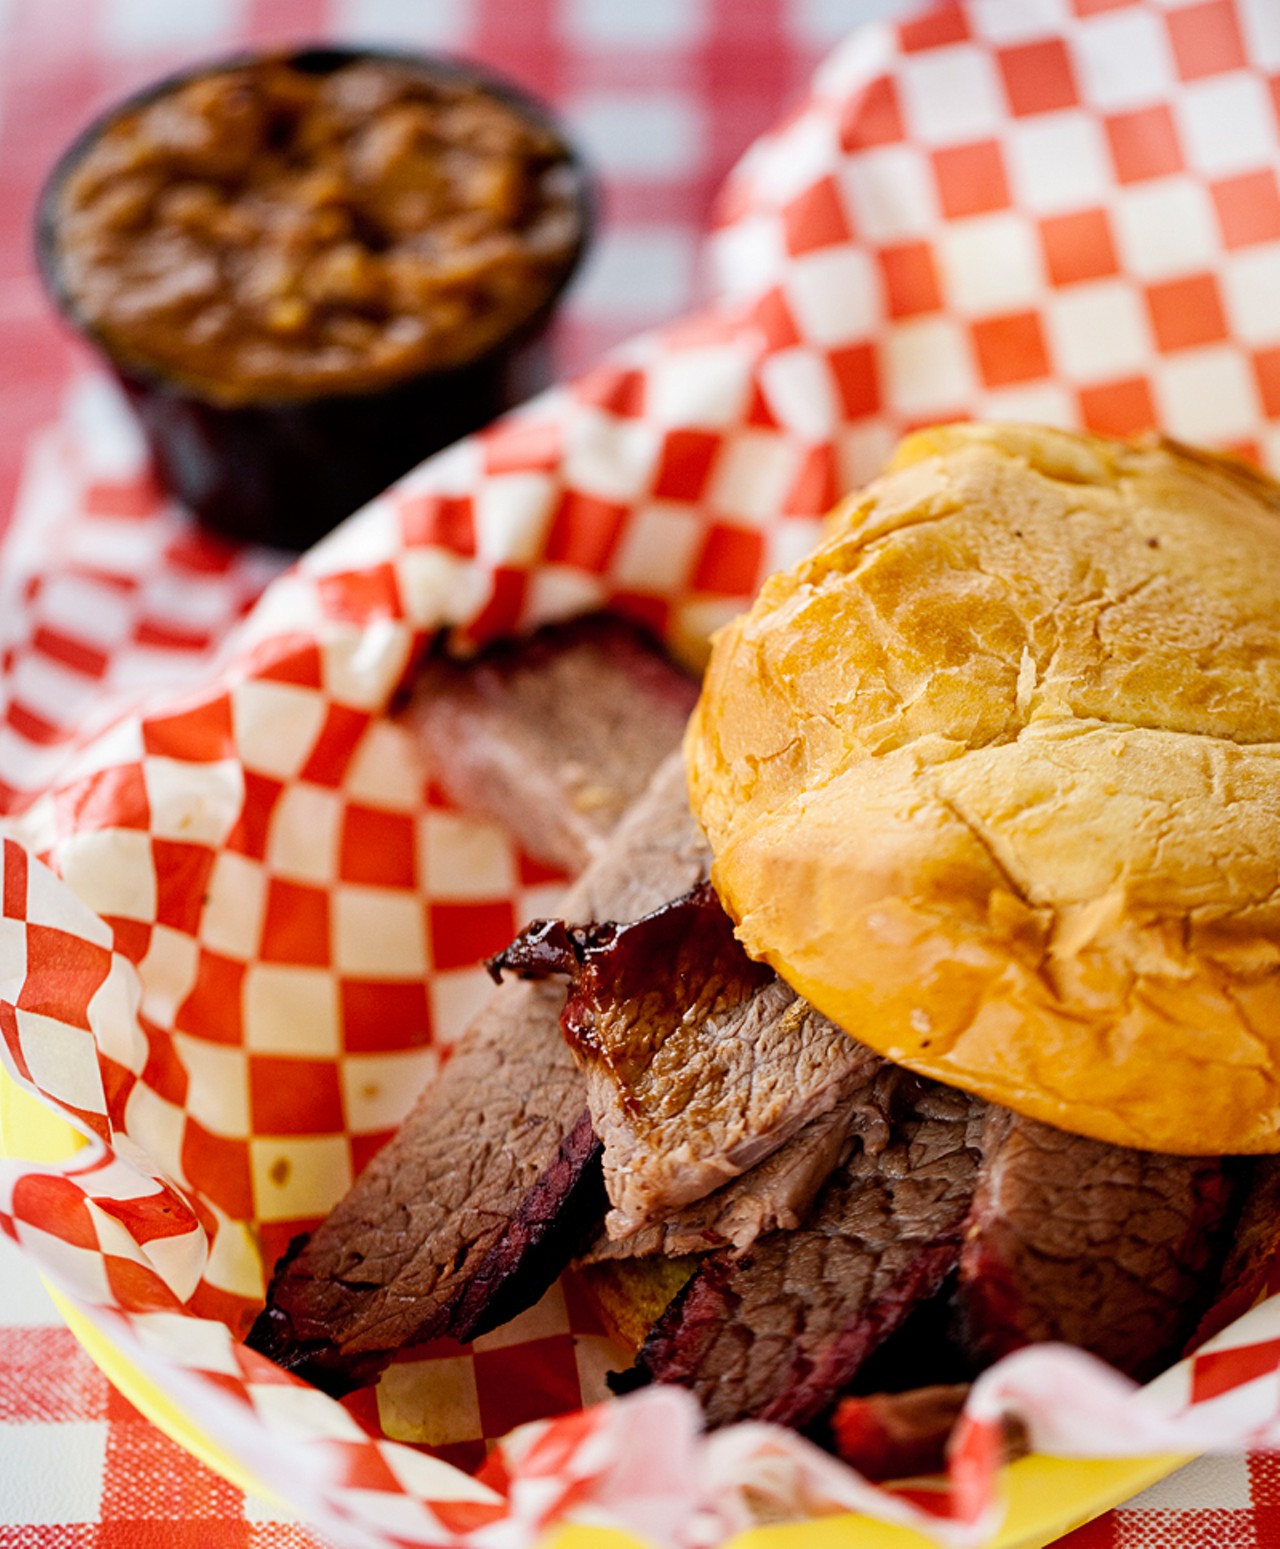 The brisket sandwich with BBQ beans.